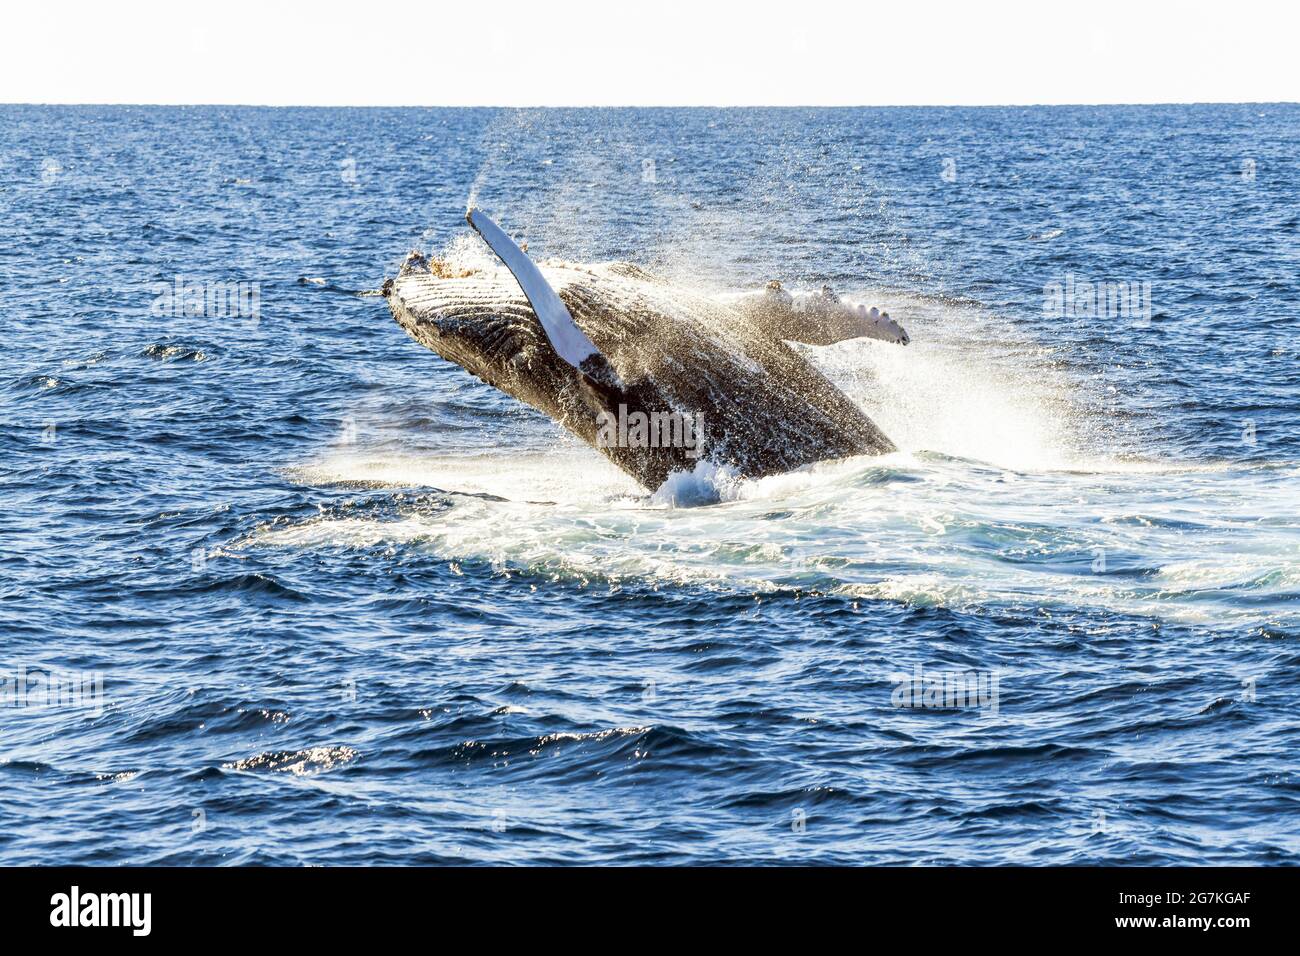 Whale flipping back into the ocean after breaching Stock Photo